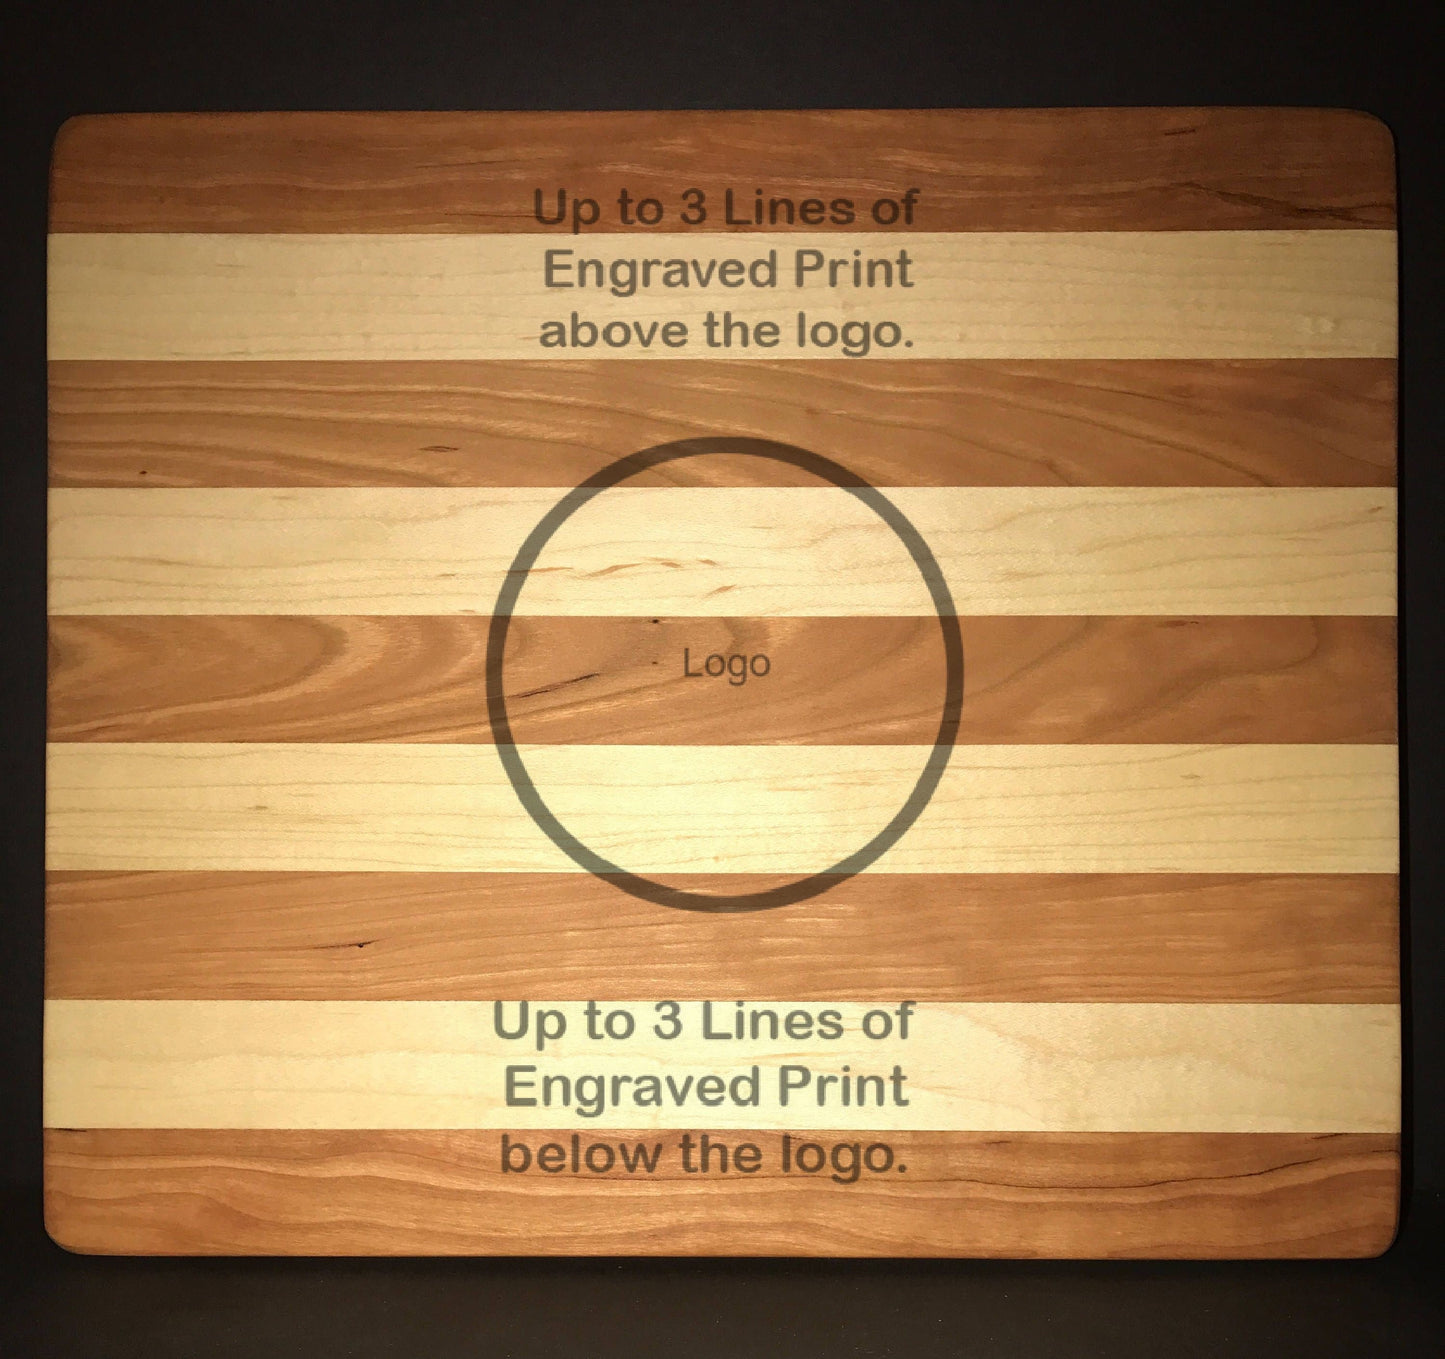 IAFF Officially Licensed 8”X10” Cuttingboards Made Out Of Cherry and Maple (12X14 & 13”X18” Also Available)